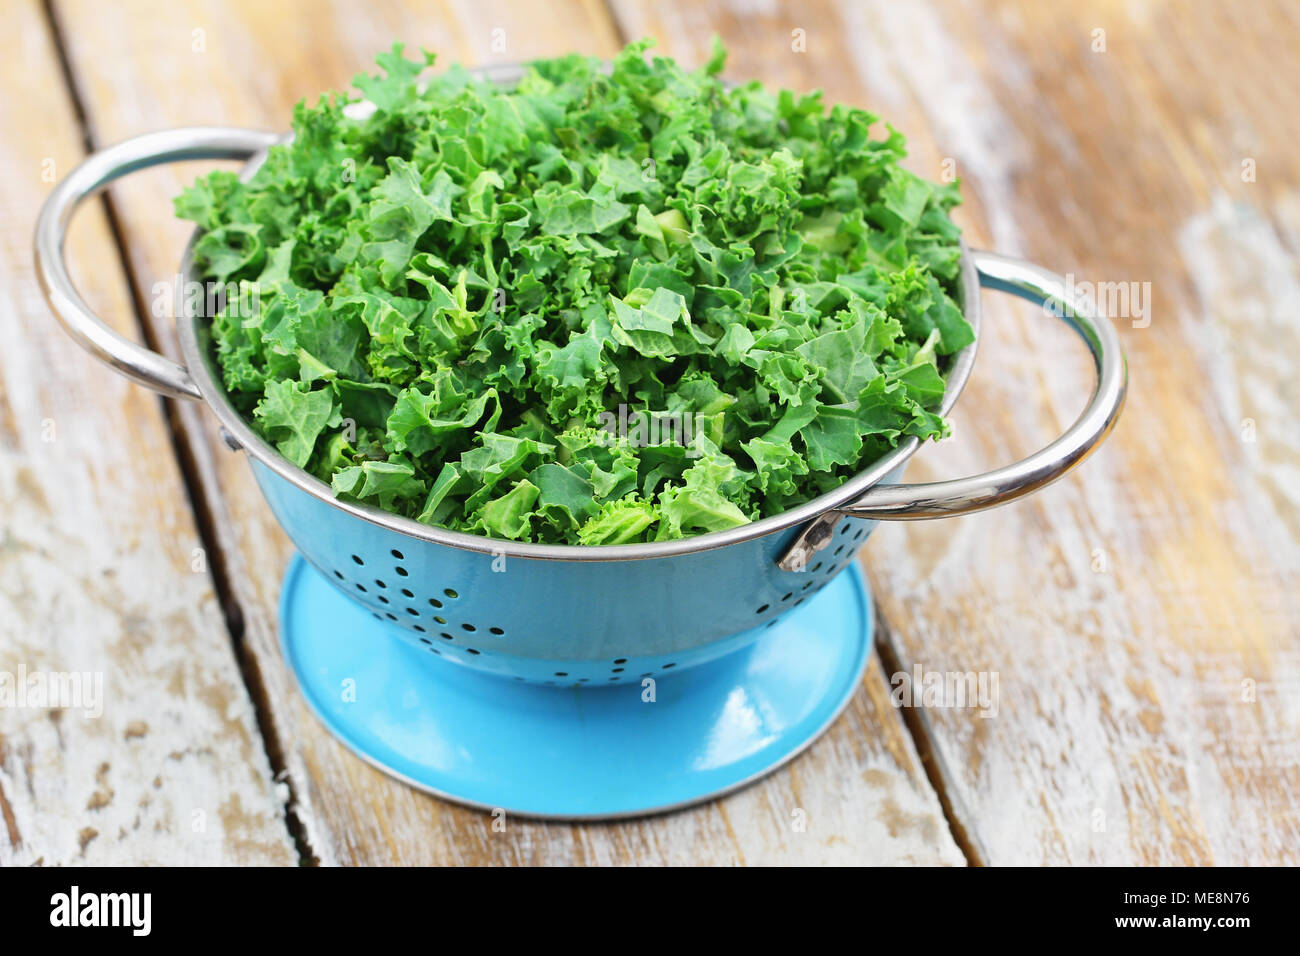 Raw kale leaves in blue colander on rustic wooden surface Stock Photo